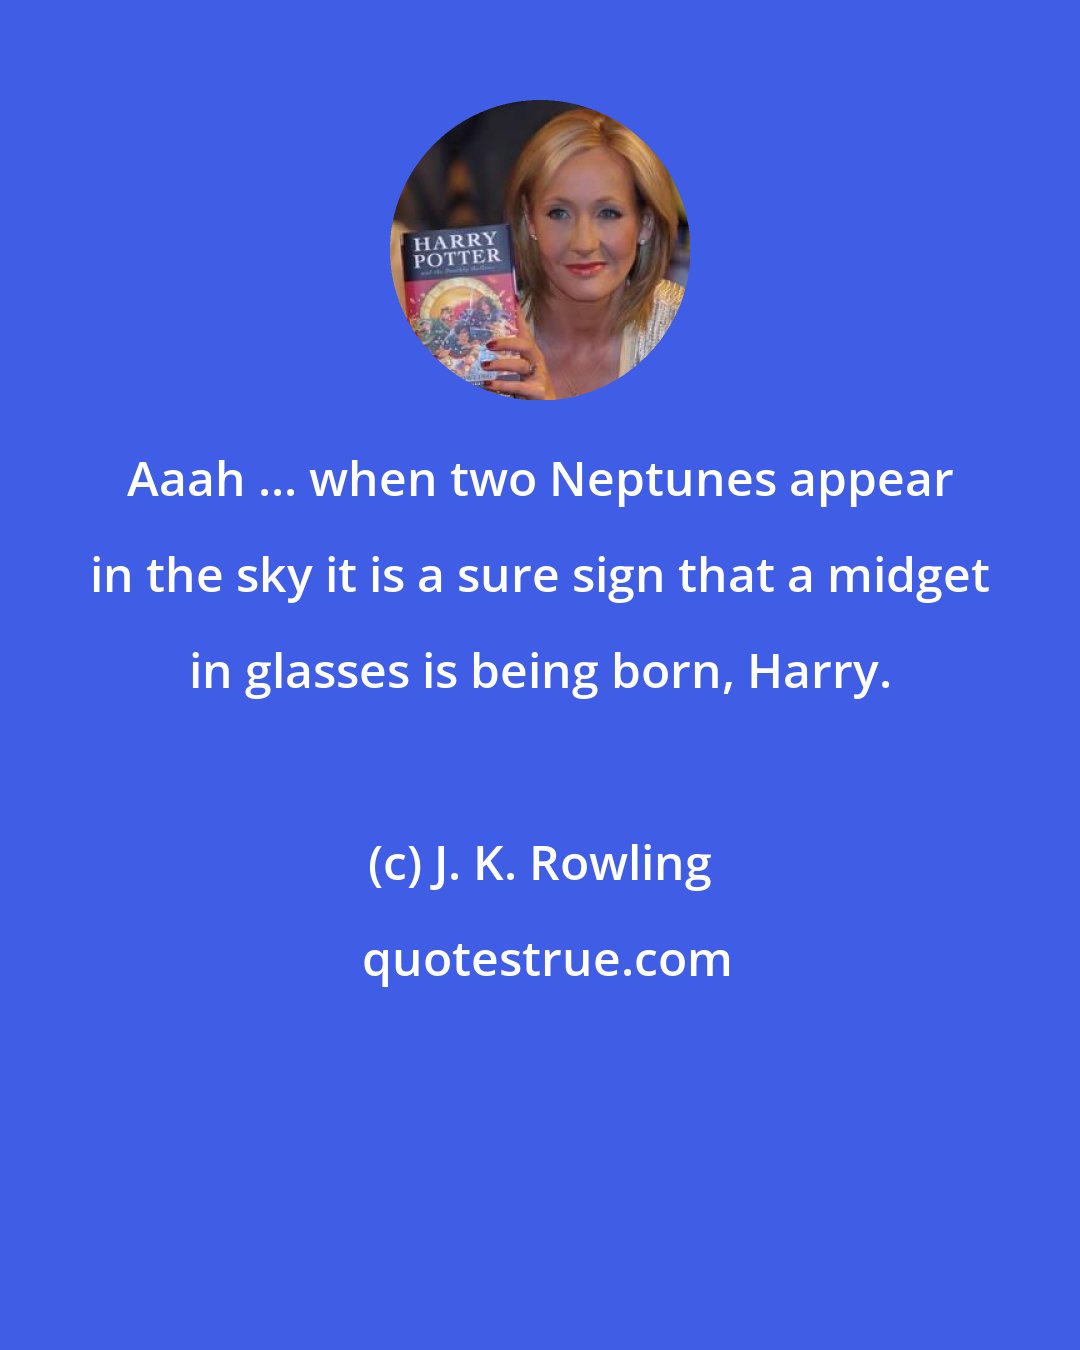 J. K. Rowling: Aaah ... when two Neptunes appear in the sky it is a sure sign that a midget in glasses is being born, Harry.